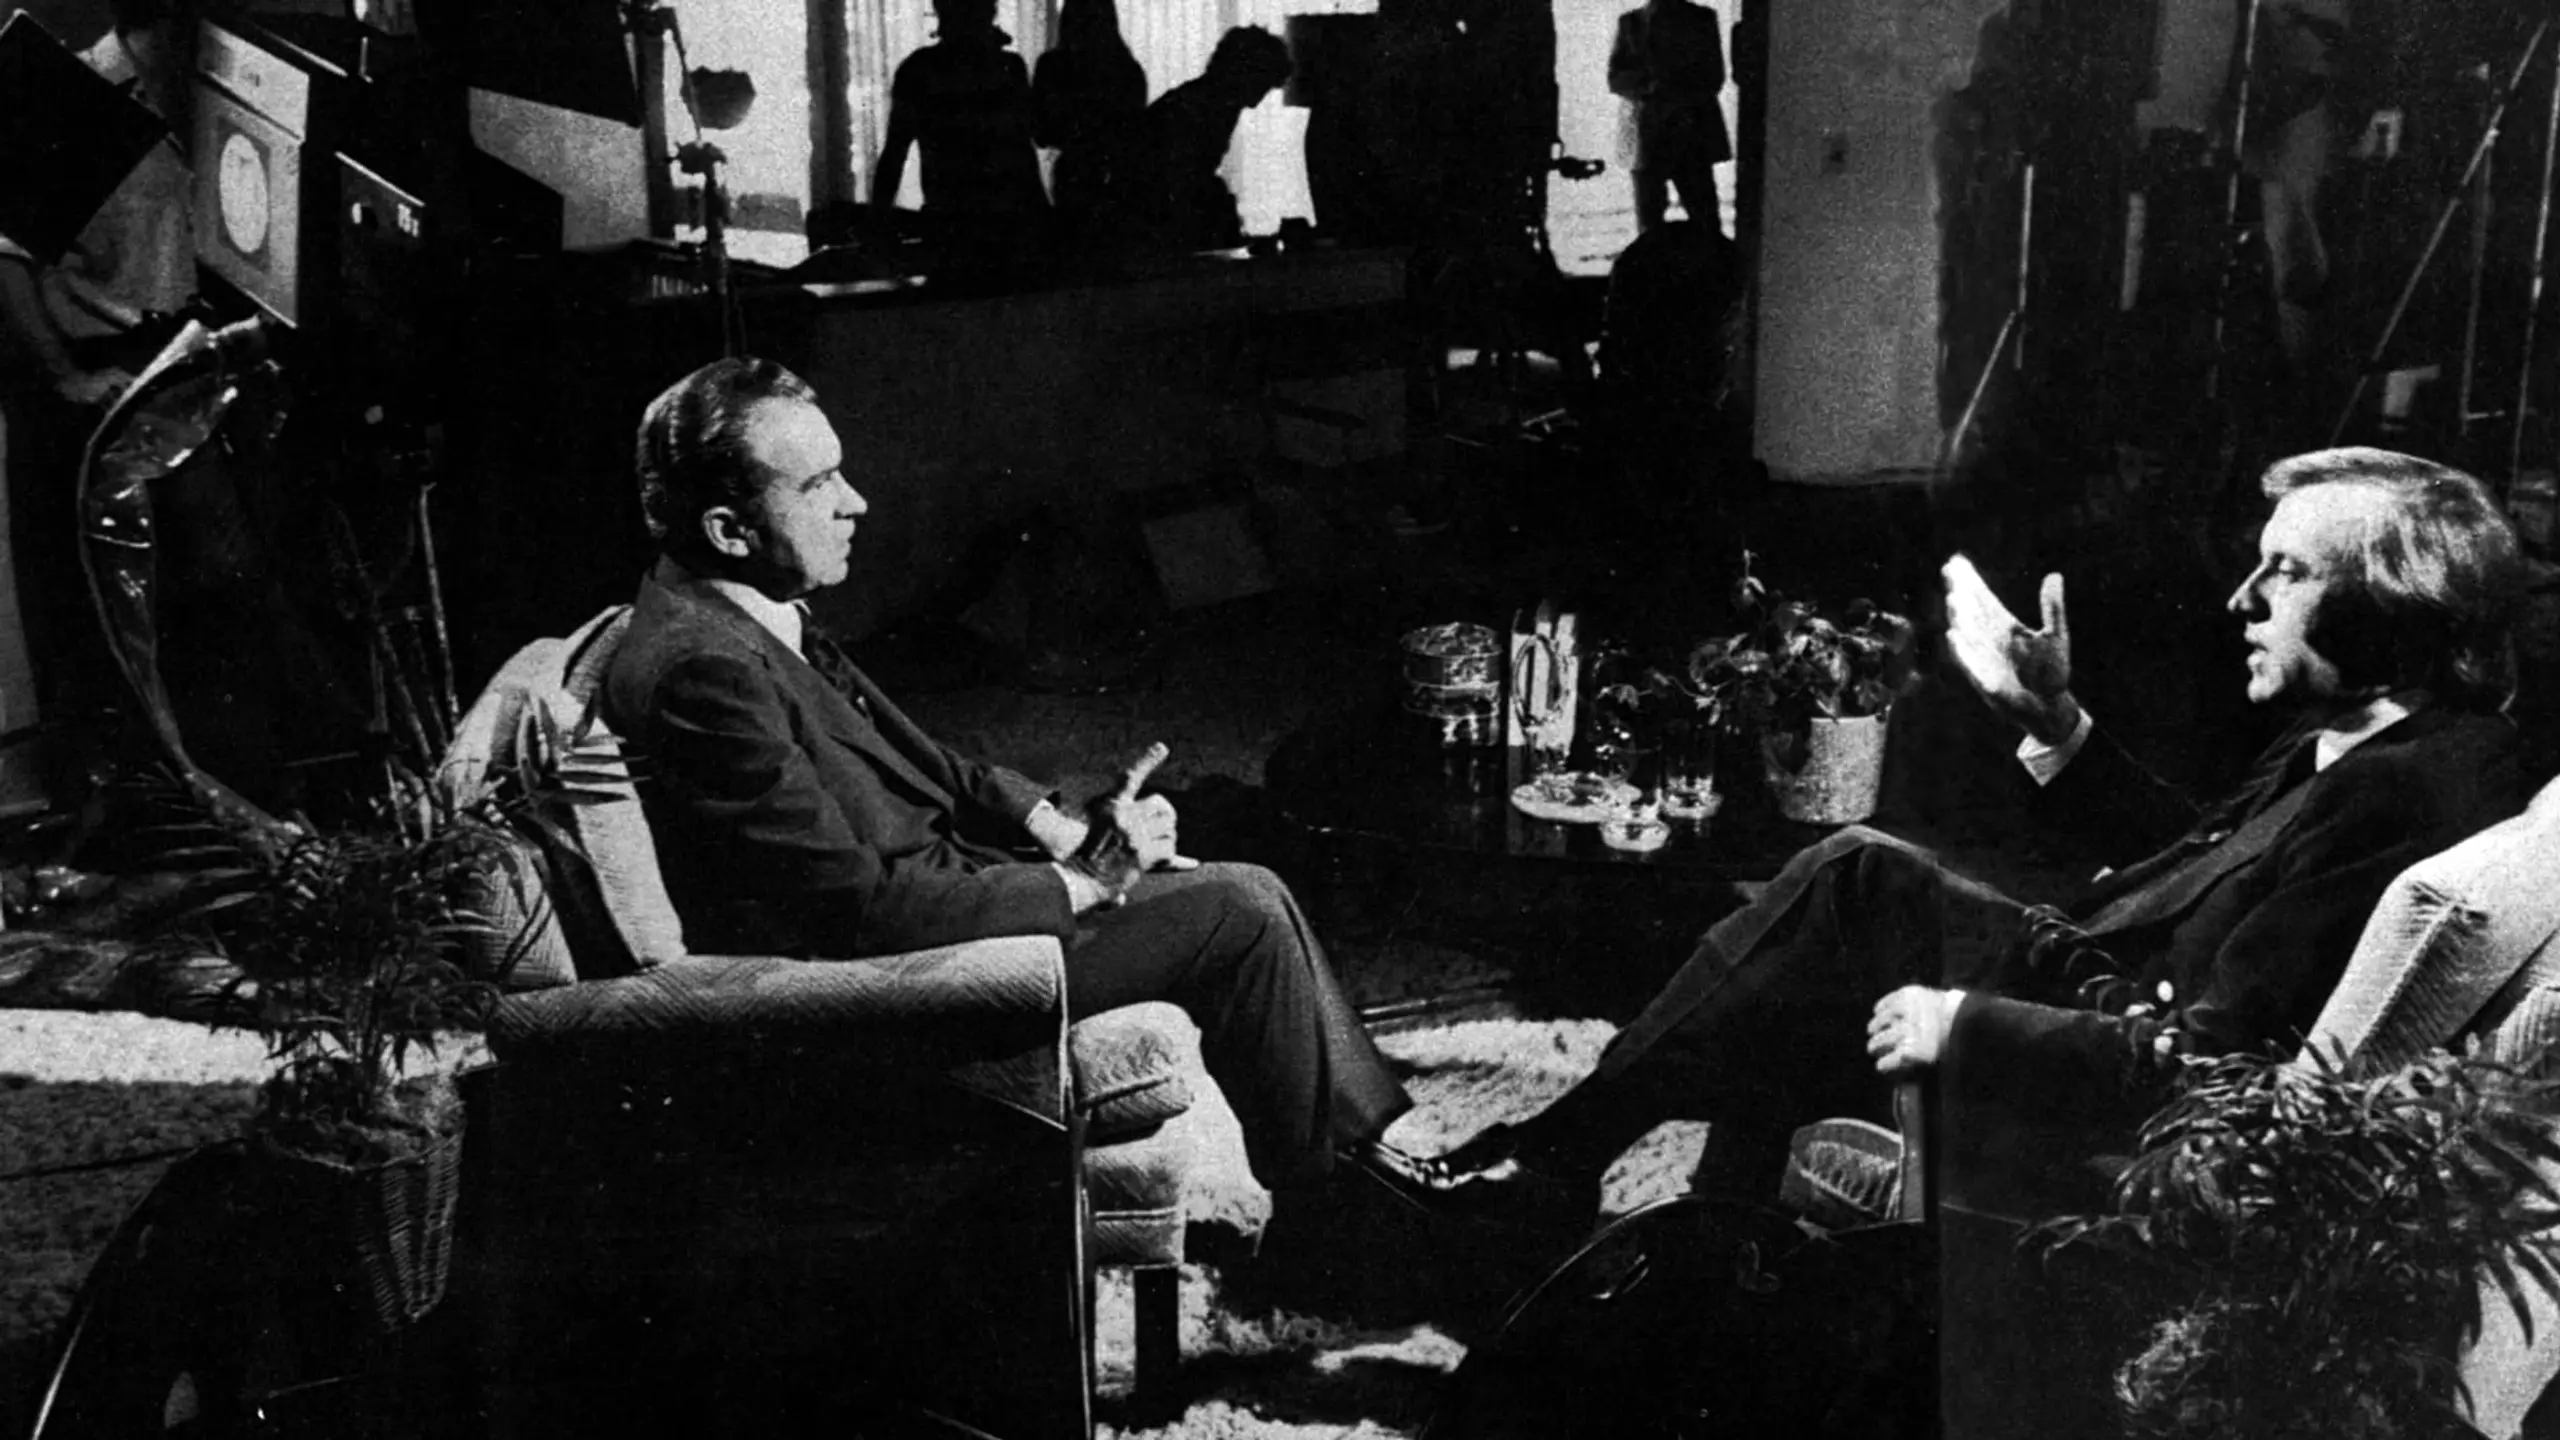 Frost/Nixon The Watergate Interview